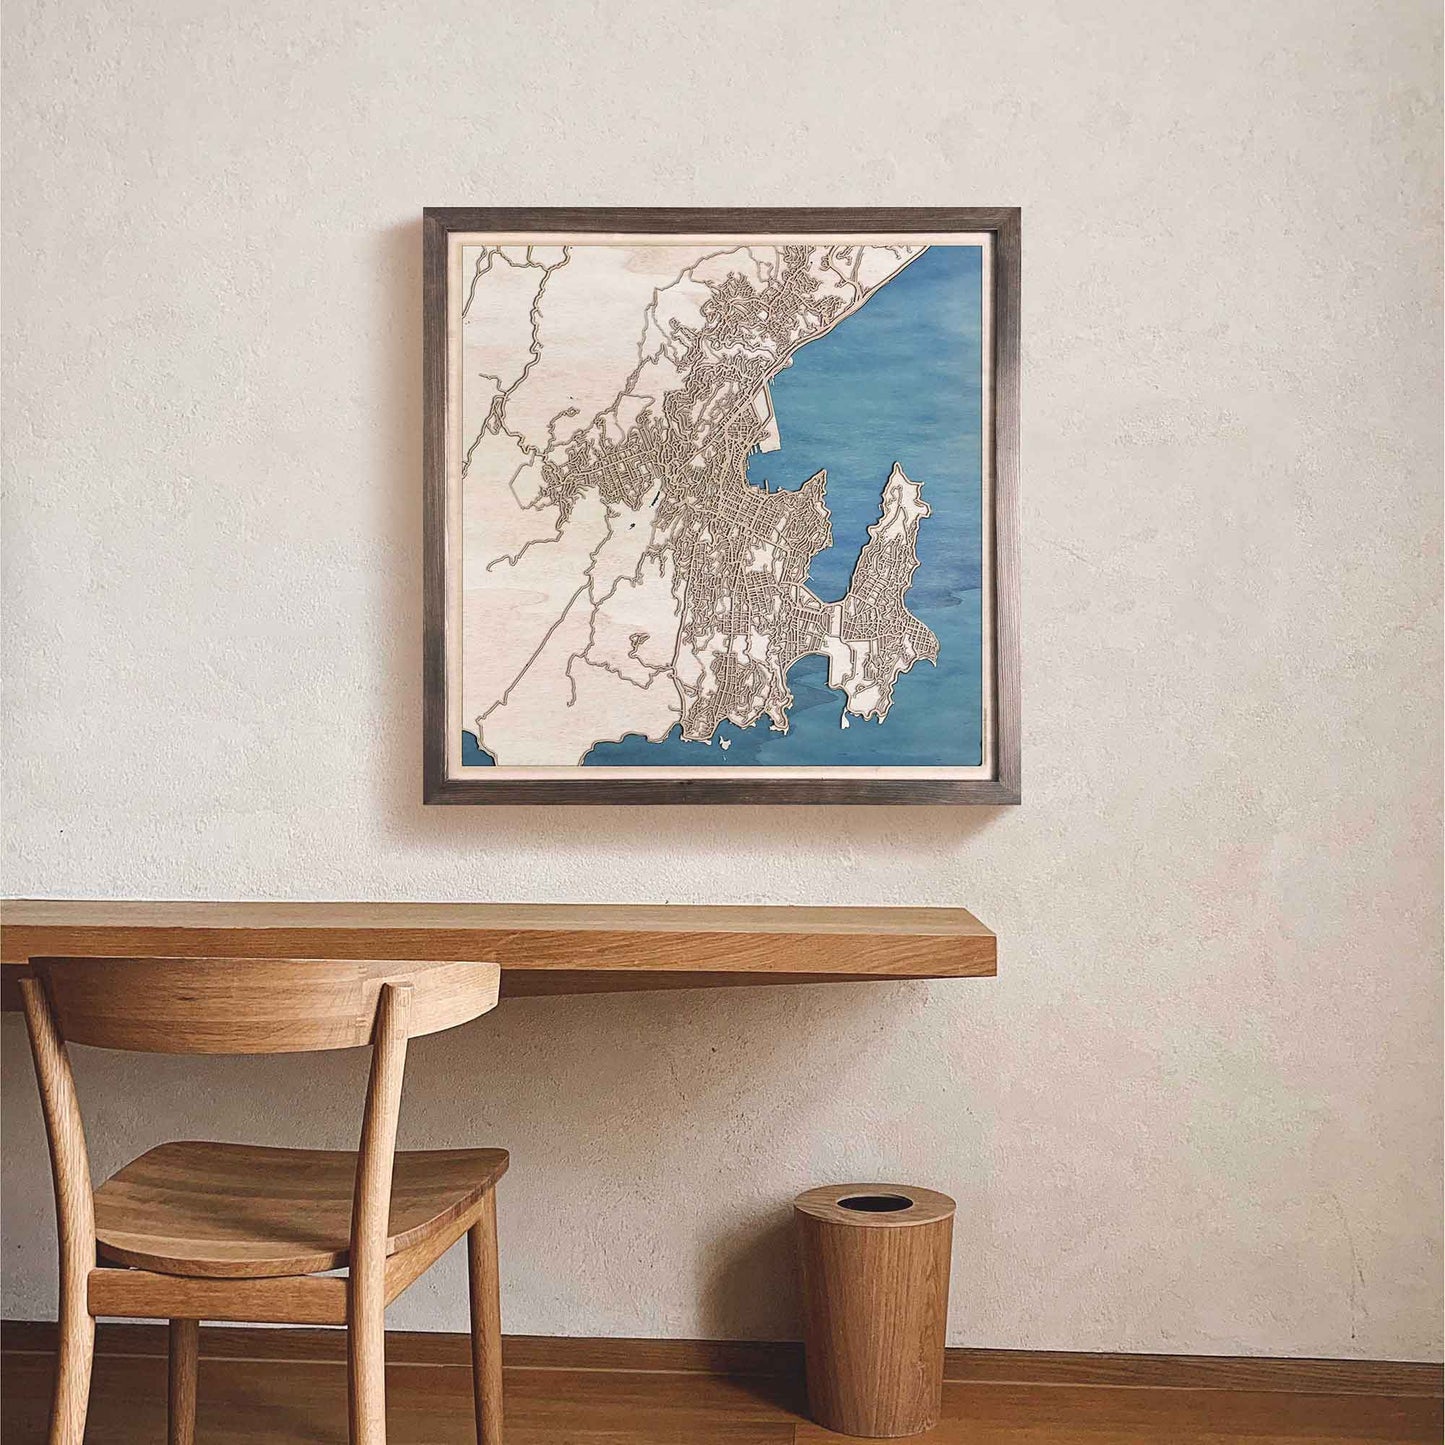 Wellington Wooden Map by CityWood - Custom Wood Map Art - Unique Laser Cut Engraved - Anniversary Gift